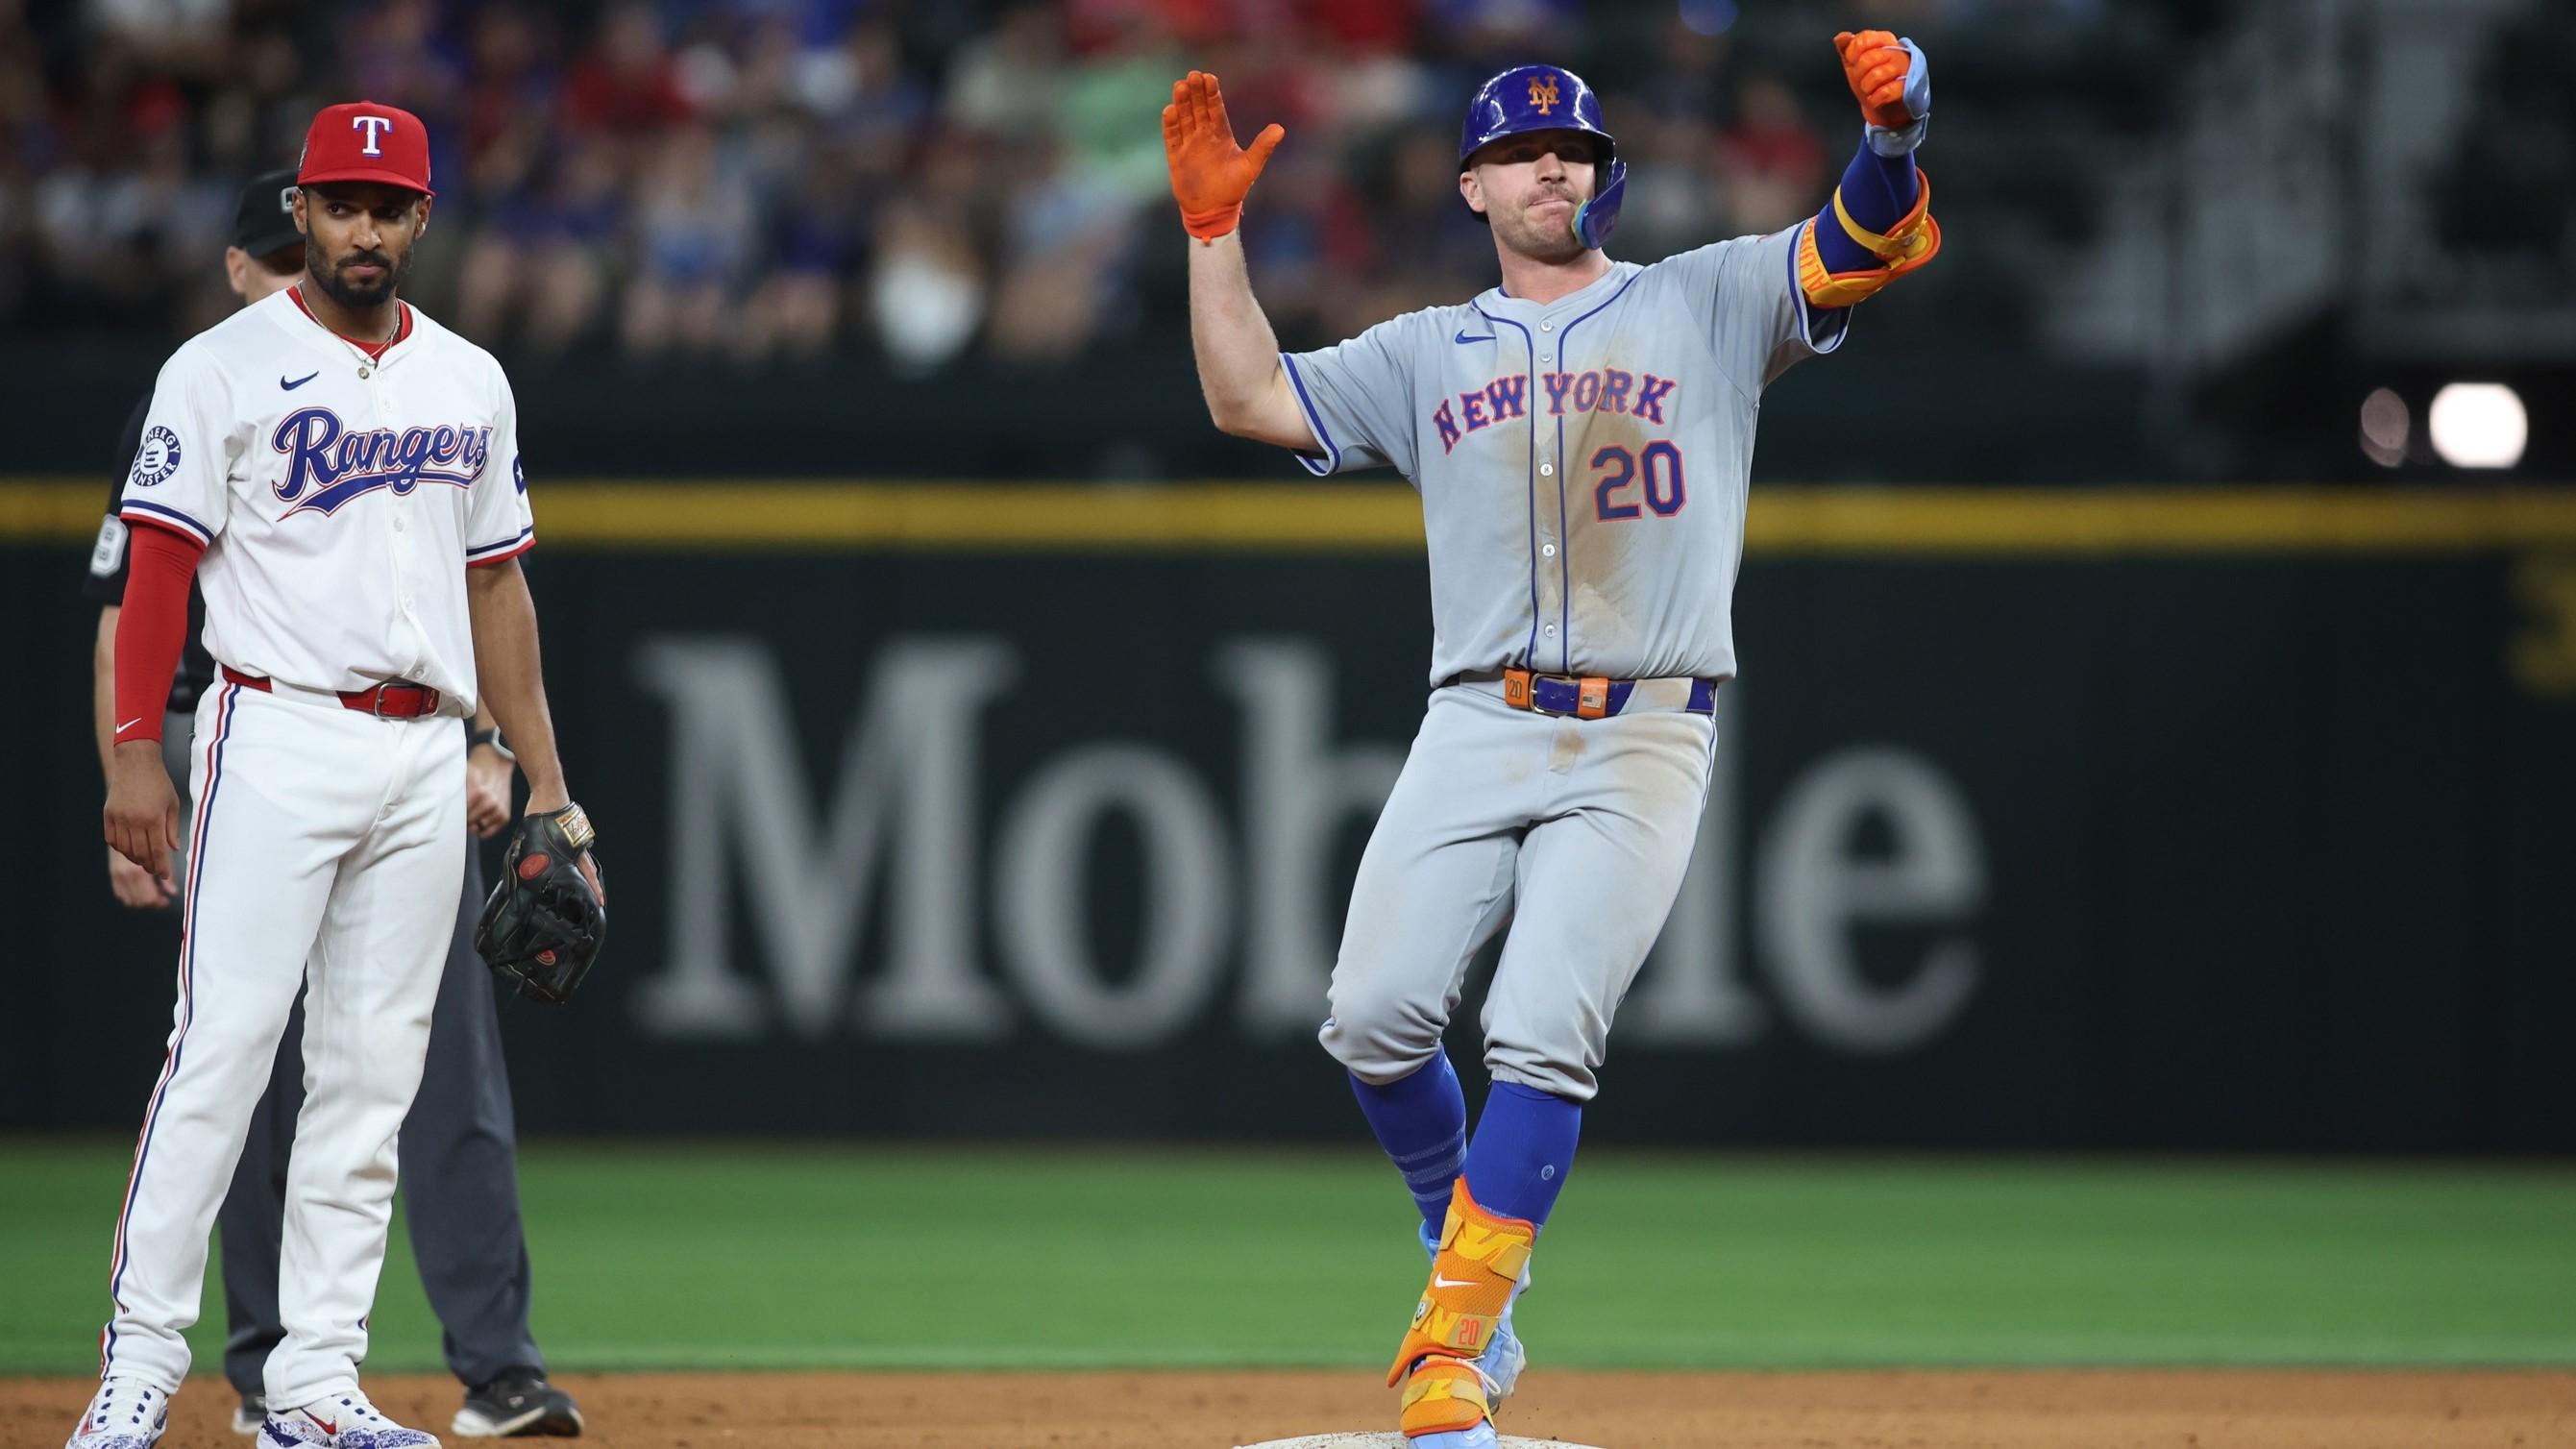 Mets not surprised by comeback win over Rangers: 'I never felt like we were out of that game'